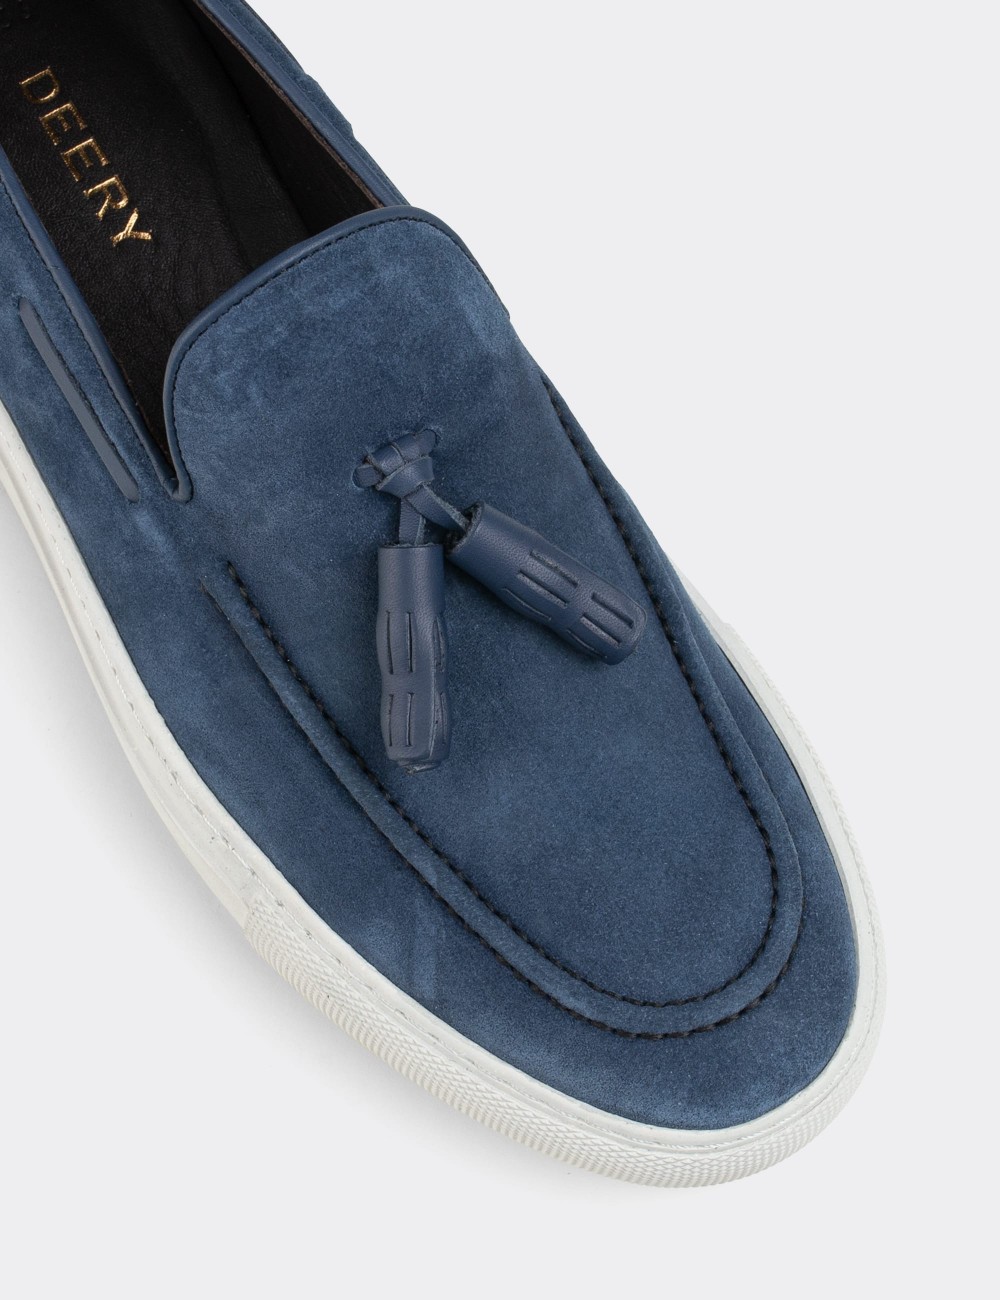 Blue Suede Leather Sneakers - 01836MMVIC01